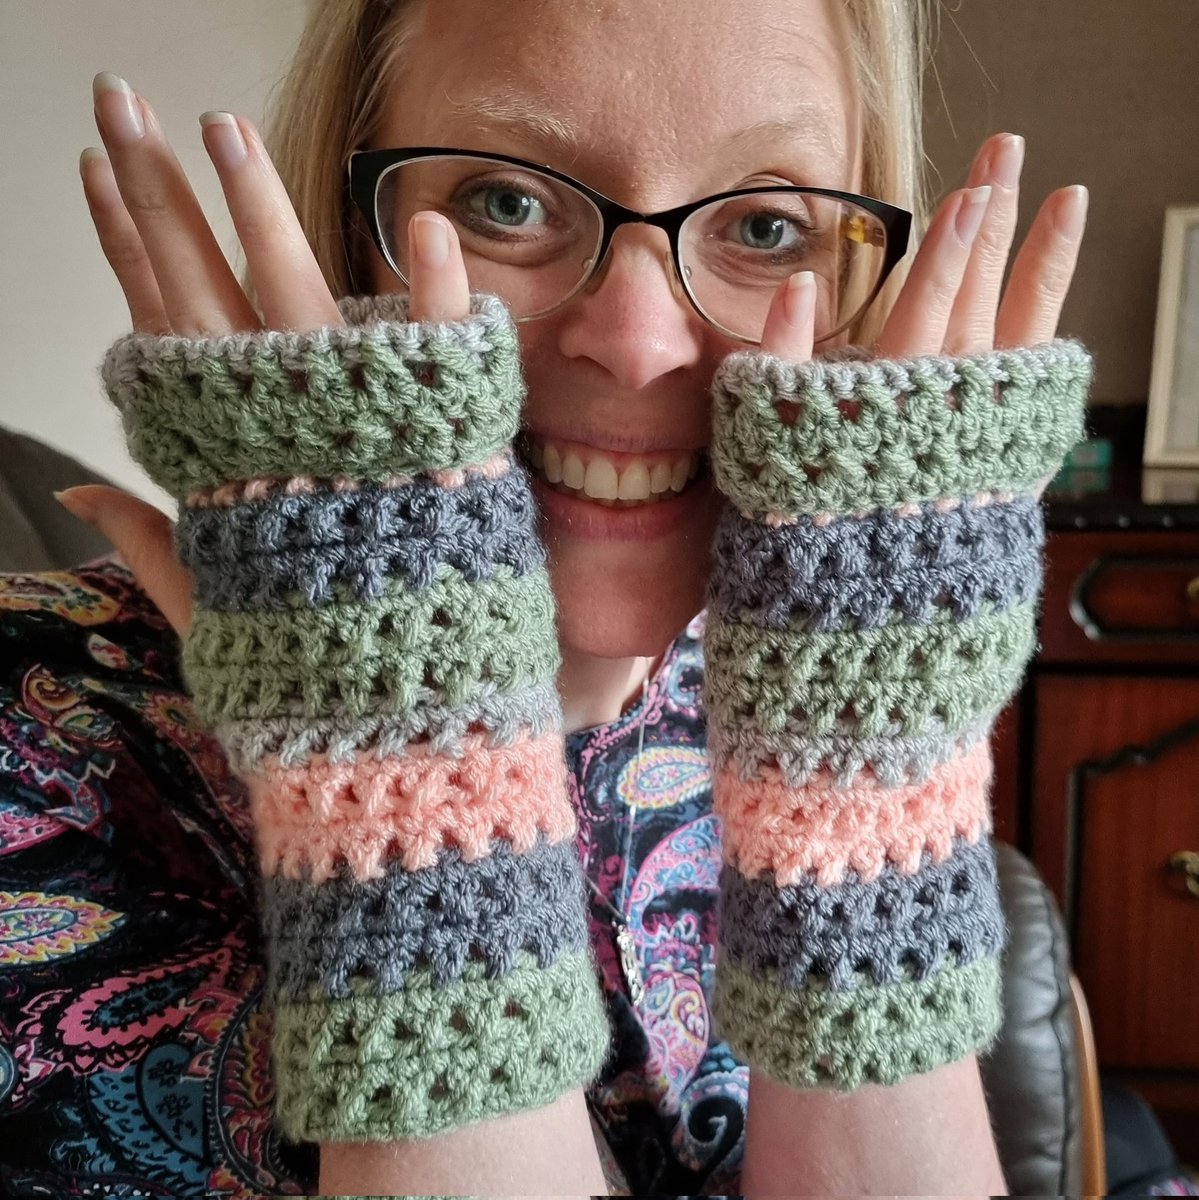 I challenged my Mother this morning to crochet me some fingerless gloves. Two hours later, she'd risen to it and exceeded expectations. 🤩🤣 xx #motherdaughter #crafting #crochet #crochetlove #gloves #fingerlessgloves #stripes #wool #woolcraft #challenge #expectations #warmhands